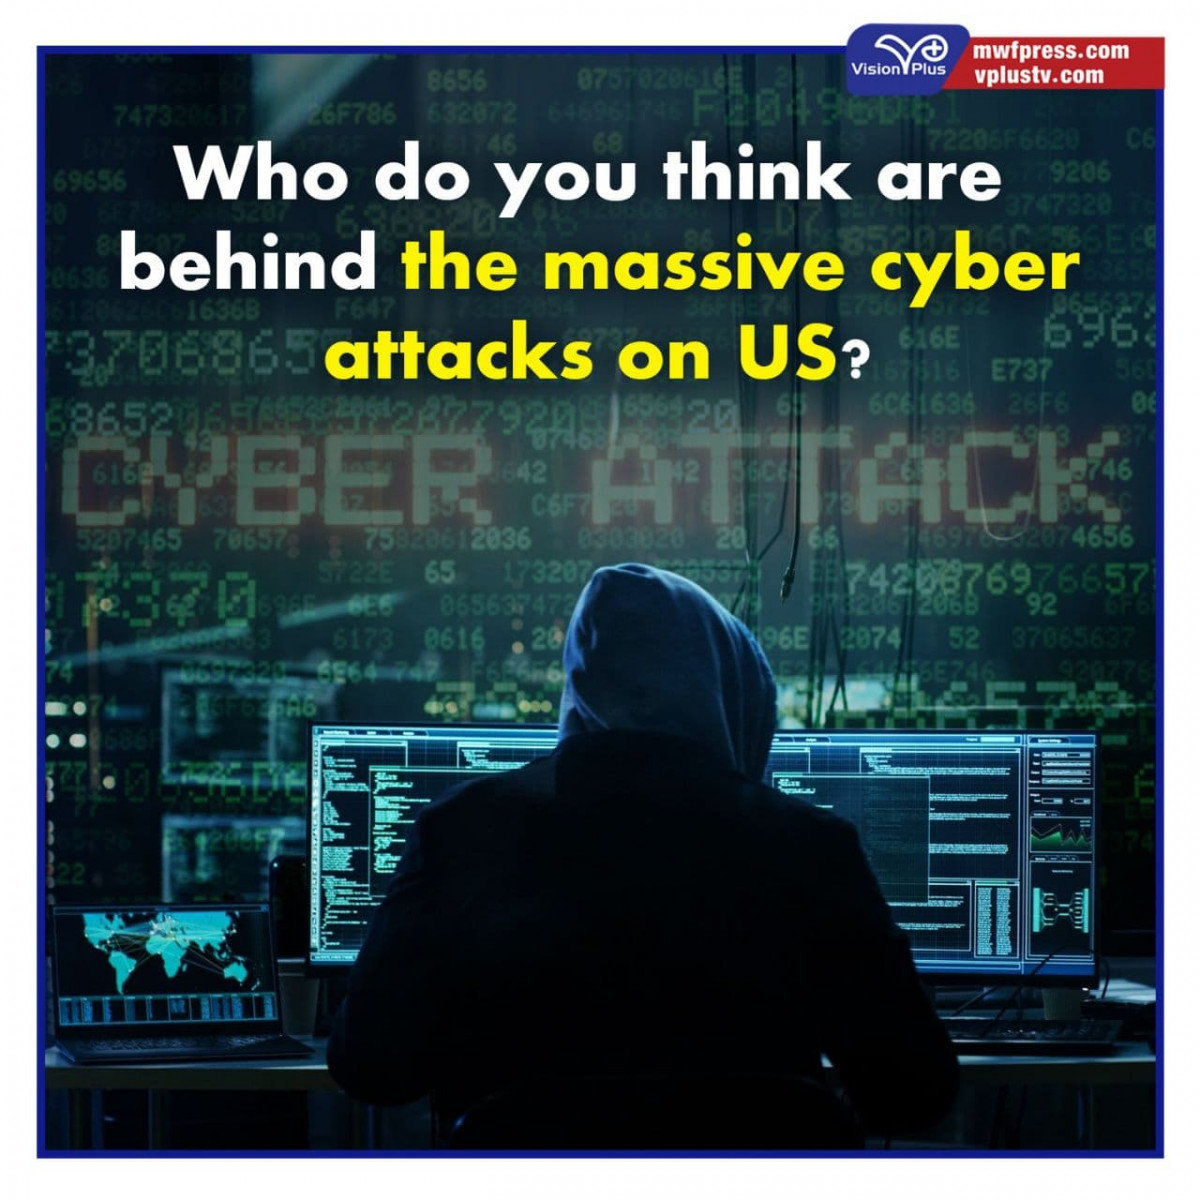 Who do you think are behind the massive cyber attacks on US